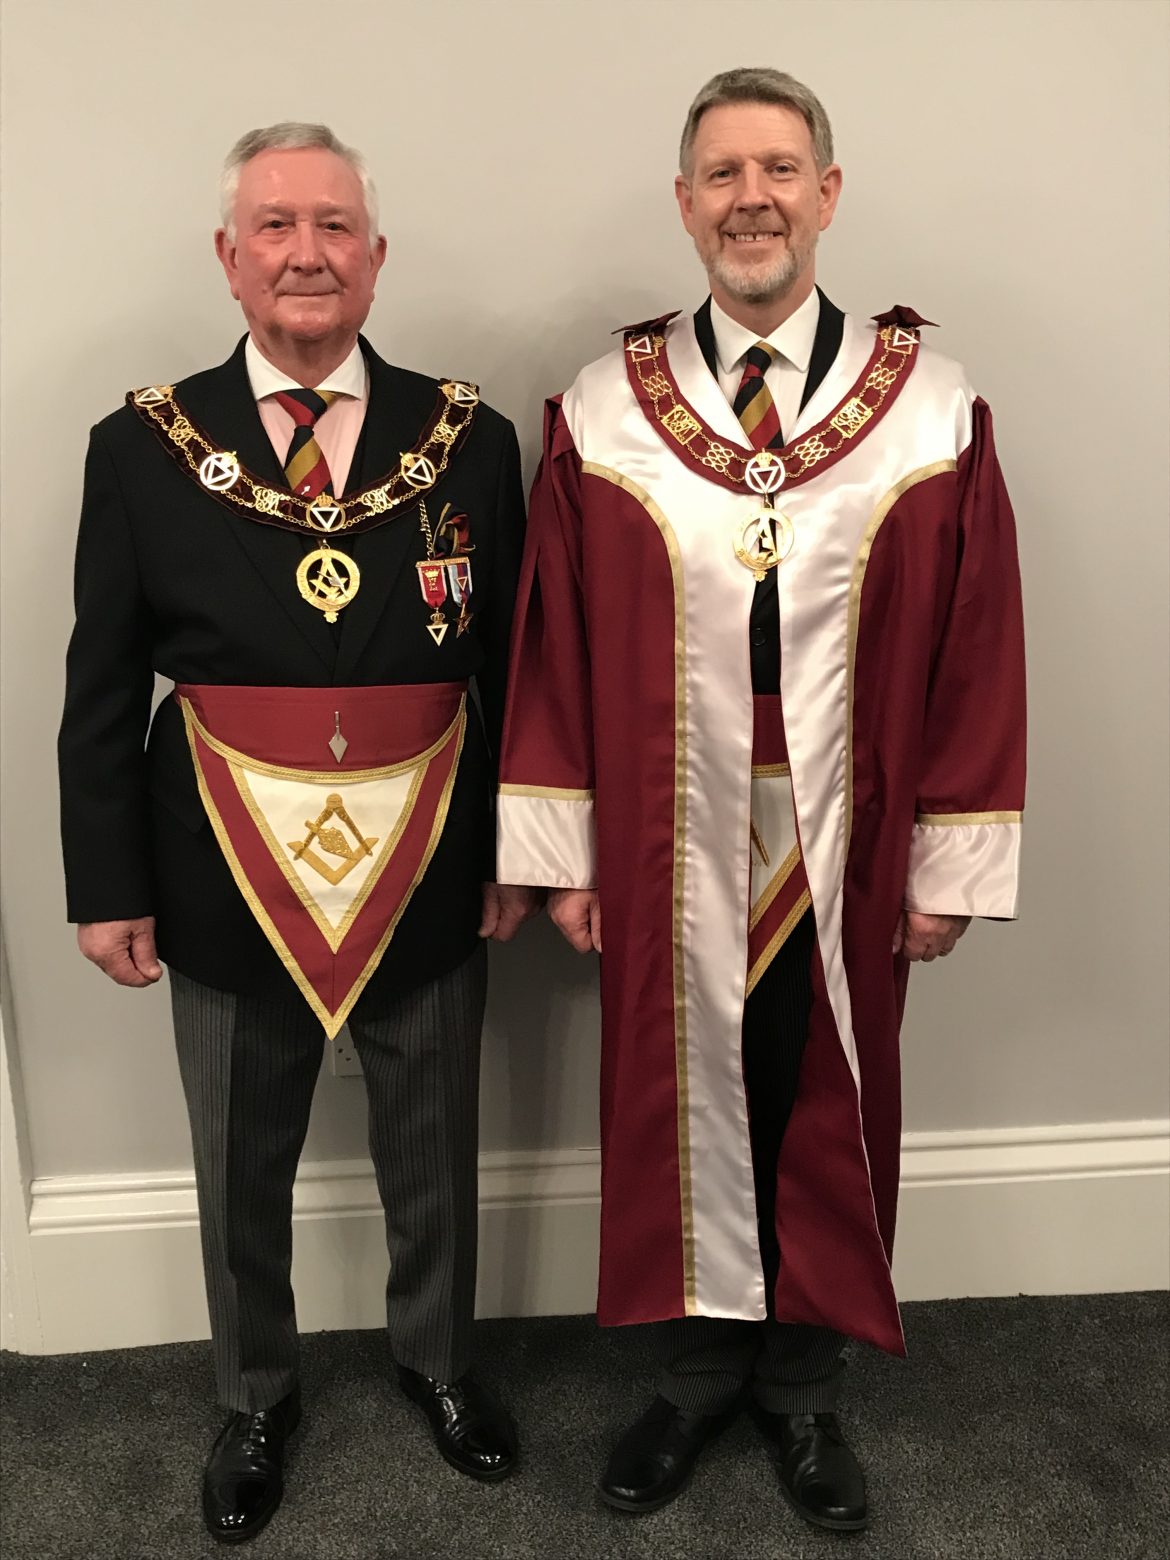 The Grand Master Visits West Yorkshire